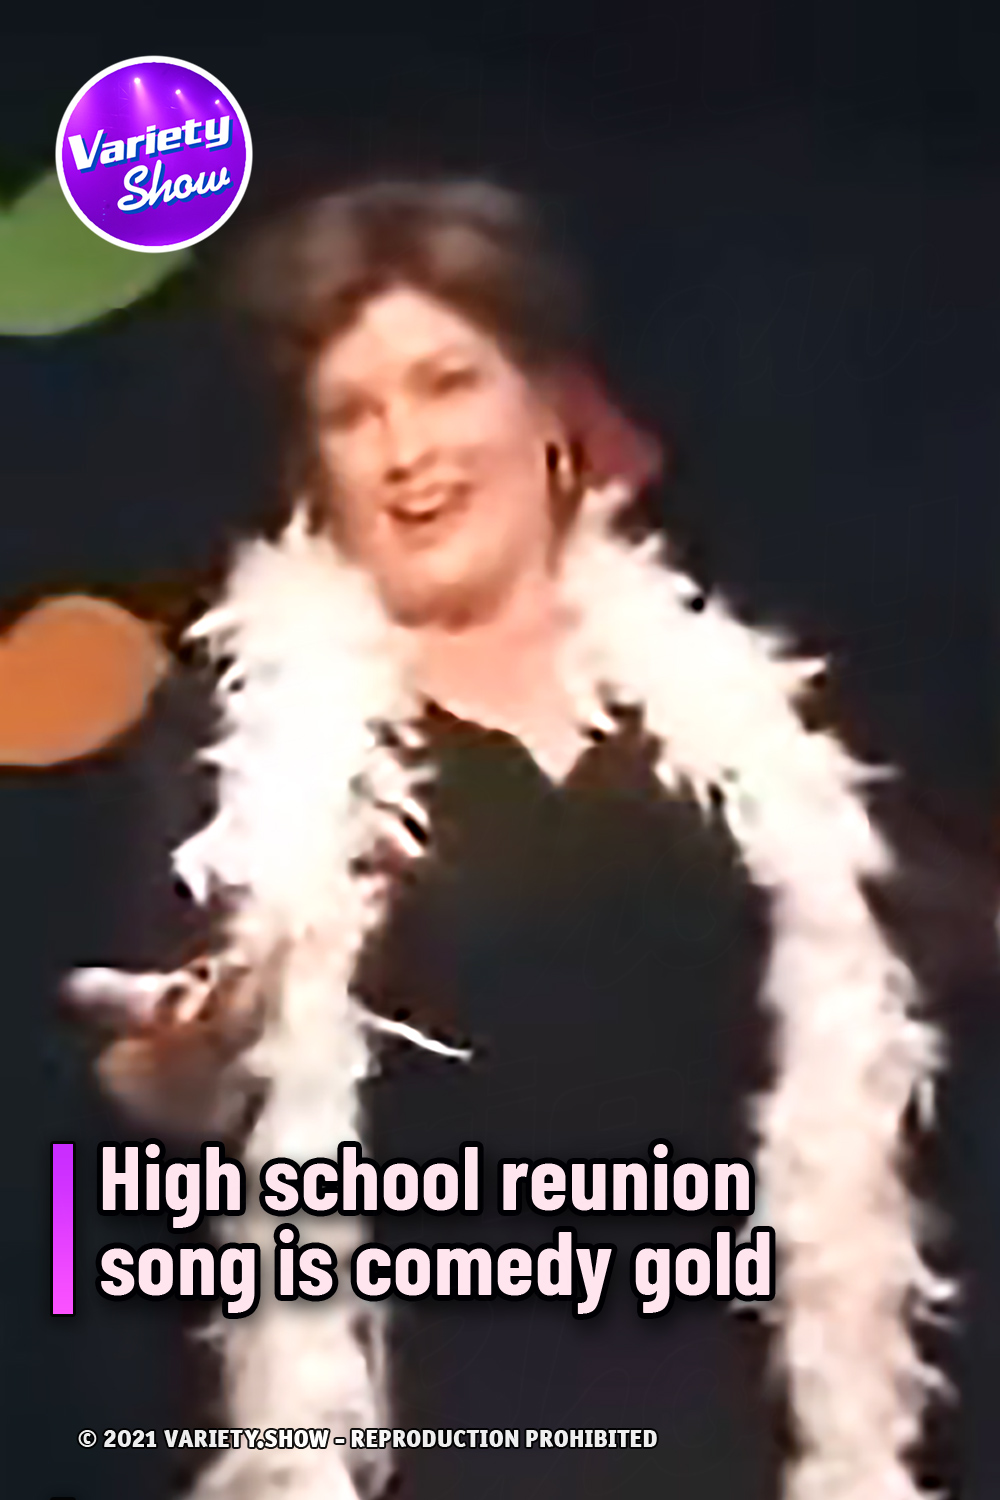 High school reunion song is comedy gold